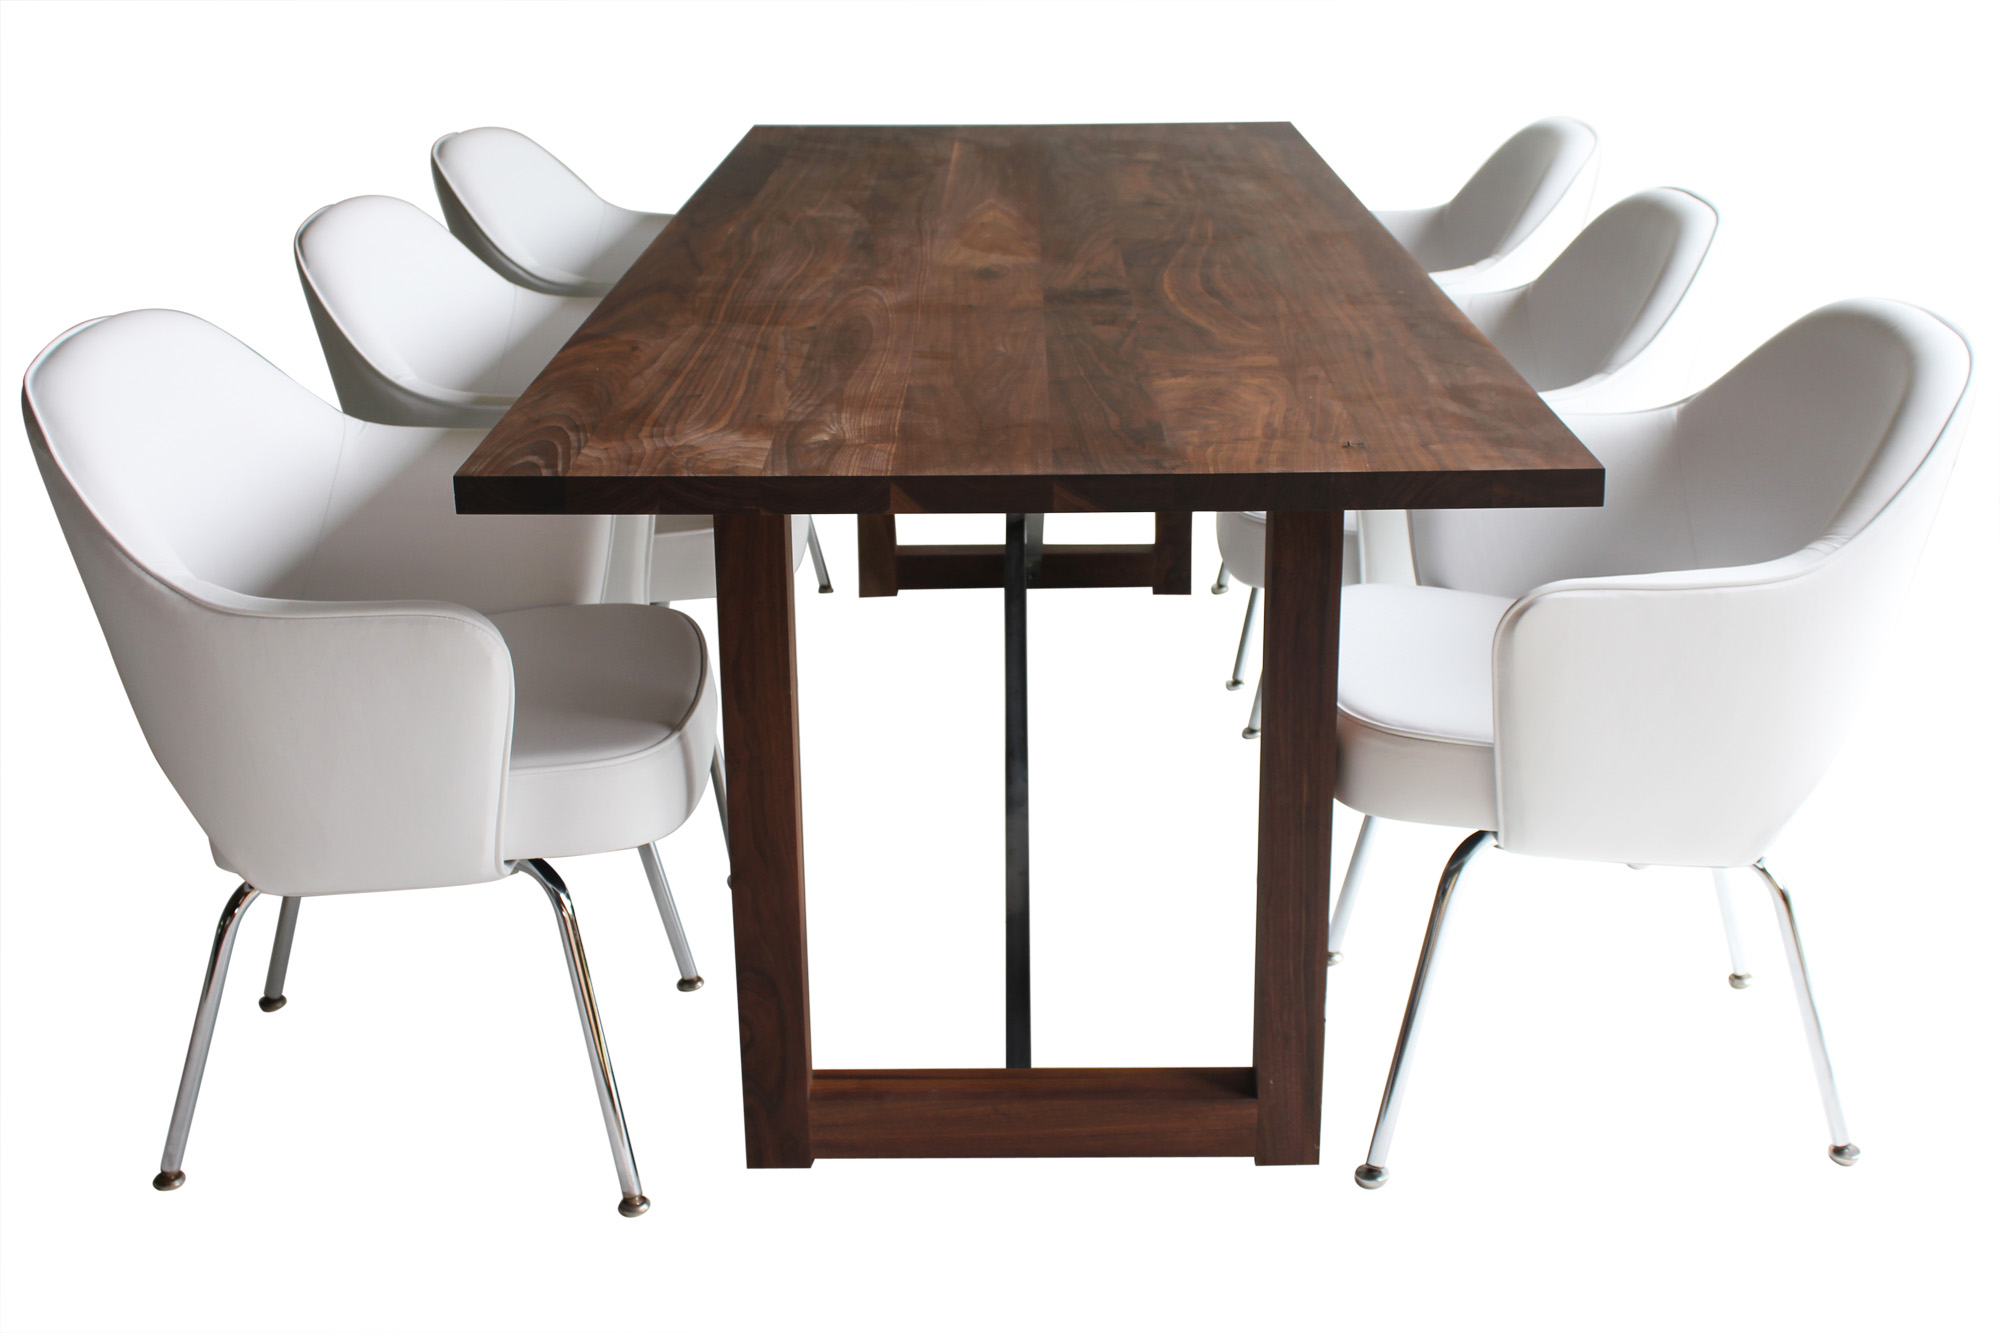 Zoom image Modern Dining Table 0116 Contemporary, Industrial, Transitional,  Rustic Folk, Organic, MidCentury